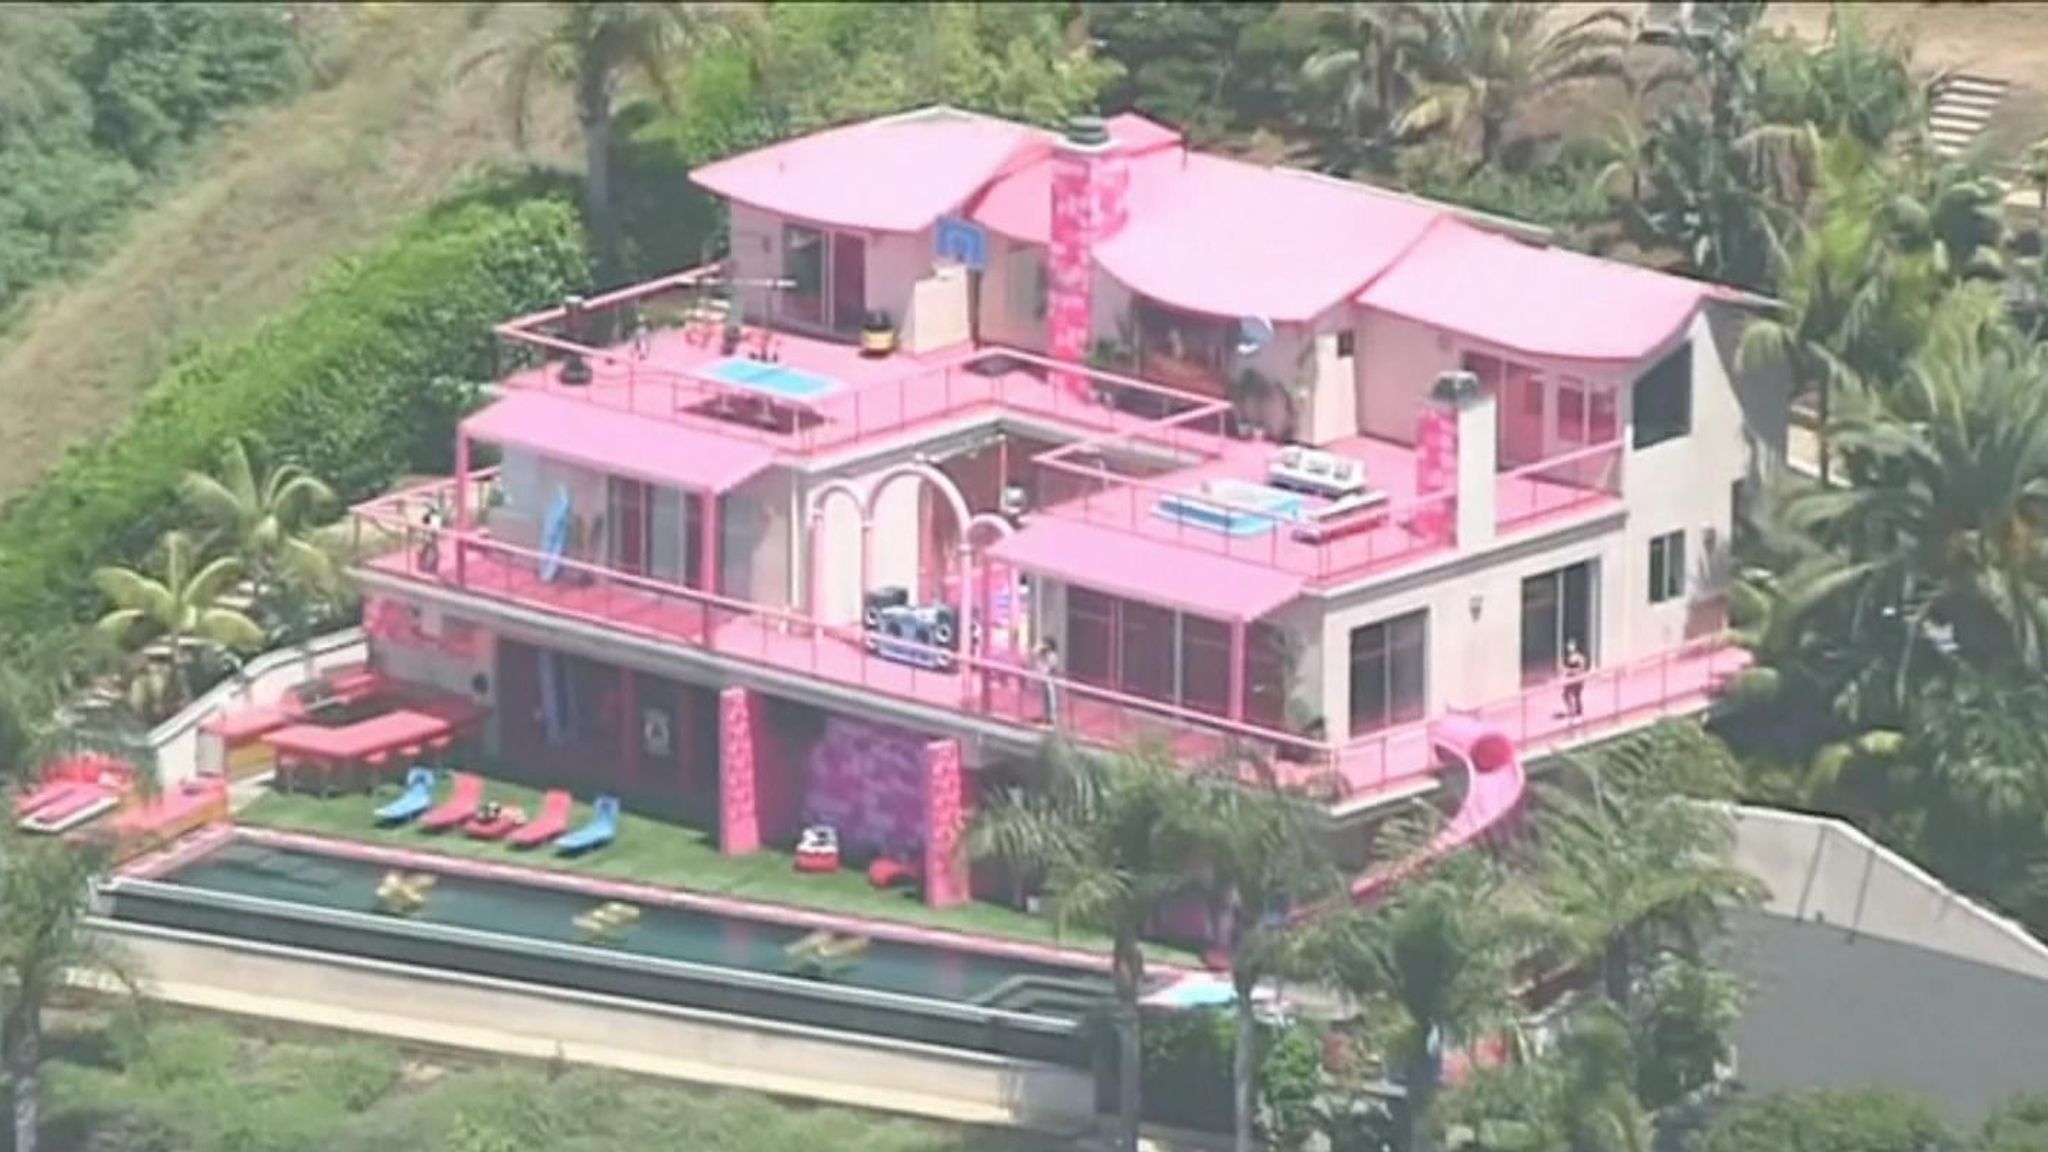 Barbie's Malibu dream house is back on Airbnb for free: See photos